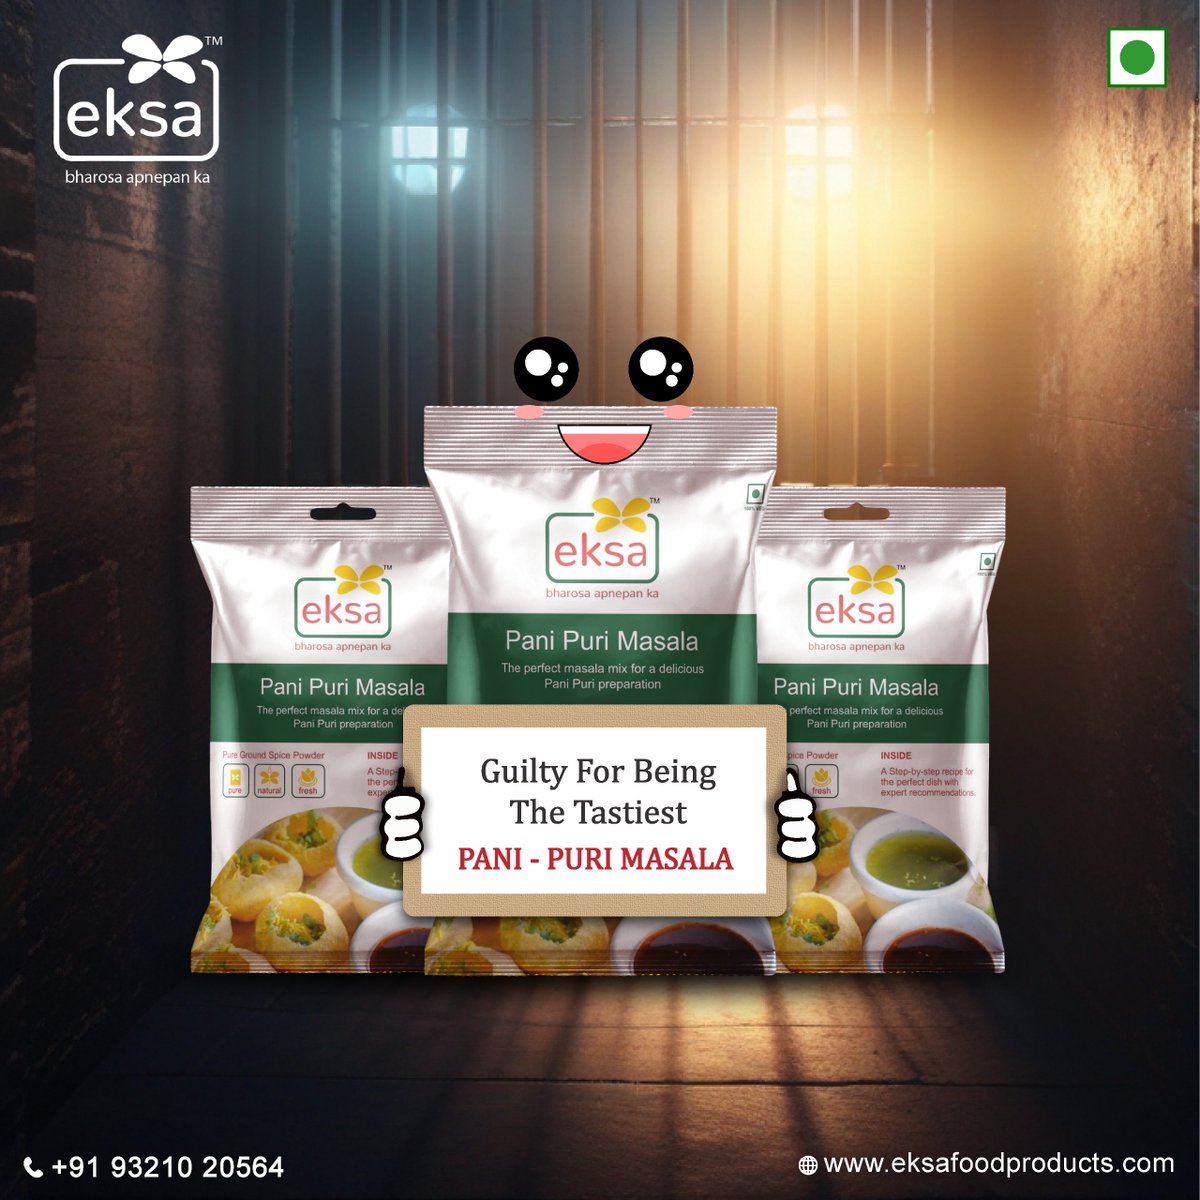 Step up your Pani Puri game with EKSA Pani Puri Masala and savor the perfect blend of spices that will leave you craving for more.

#eksa #eksafoodproducts #eksamasala #bharosaapnepanka #spices #masala #spice #food #foodie #foodlover #deliciousfood #deliciouseats #delicioustreats